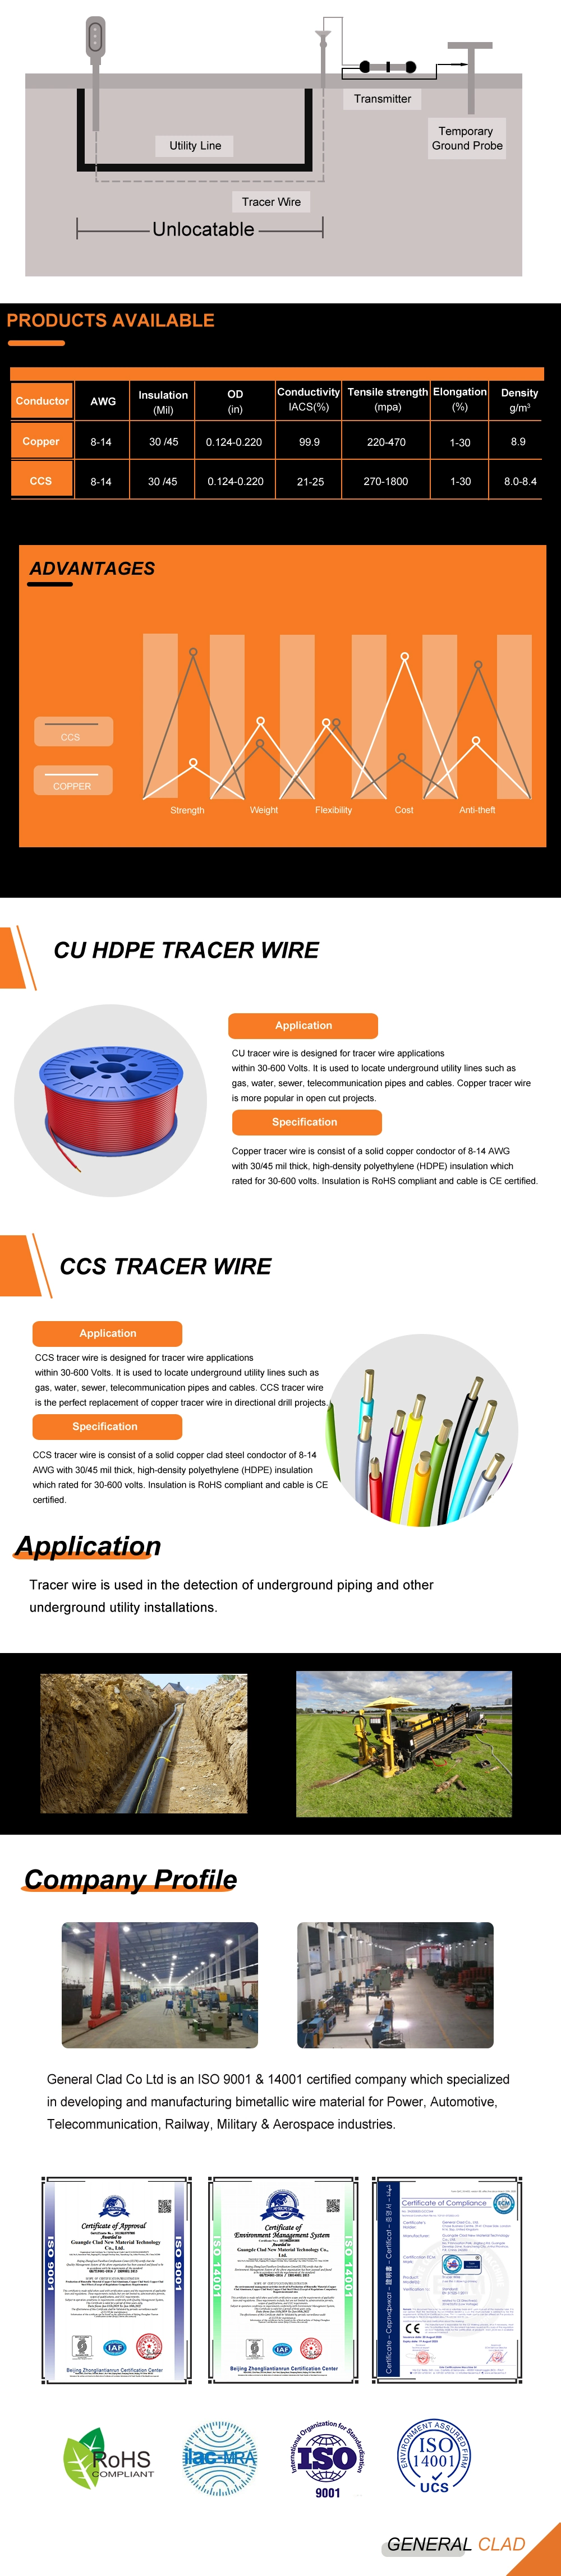 Electrical Wire Tracer 11 AWG Tracer Wire CUPVC45